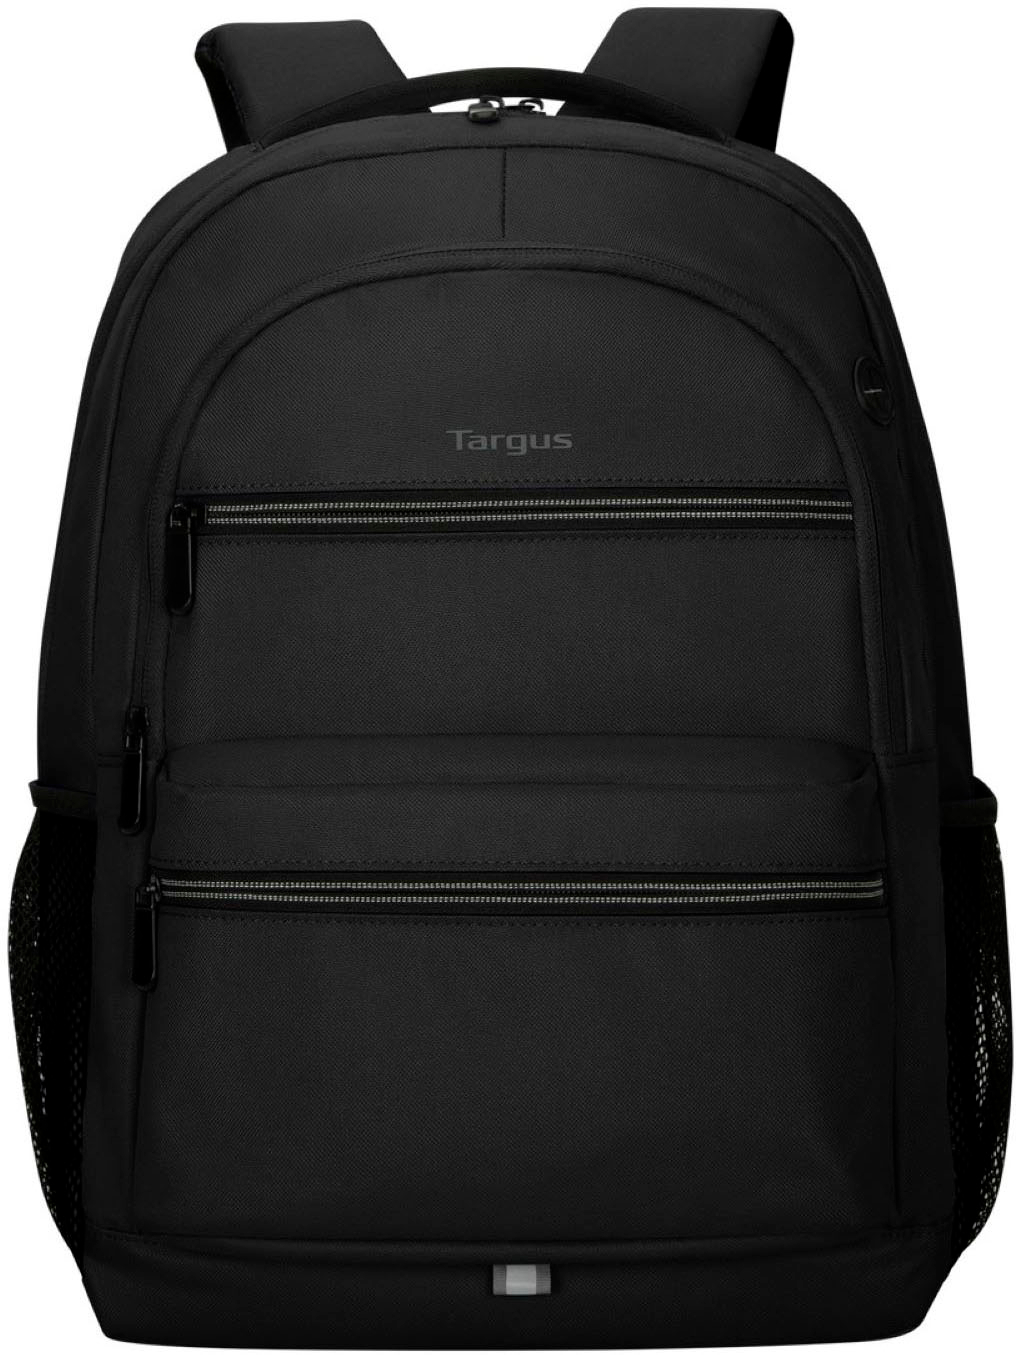 Targus - Octave II Backpack for 15.6” Laptops $12 + Free Shipping